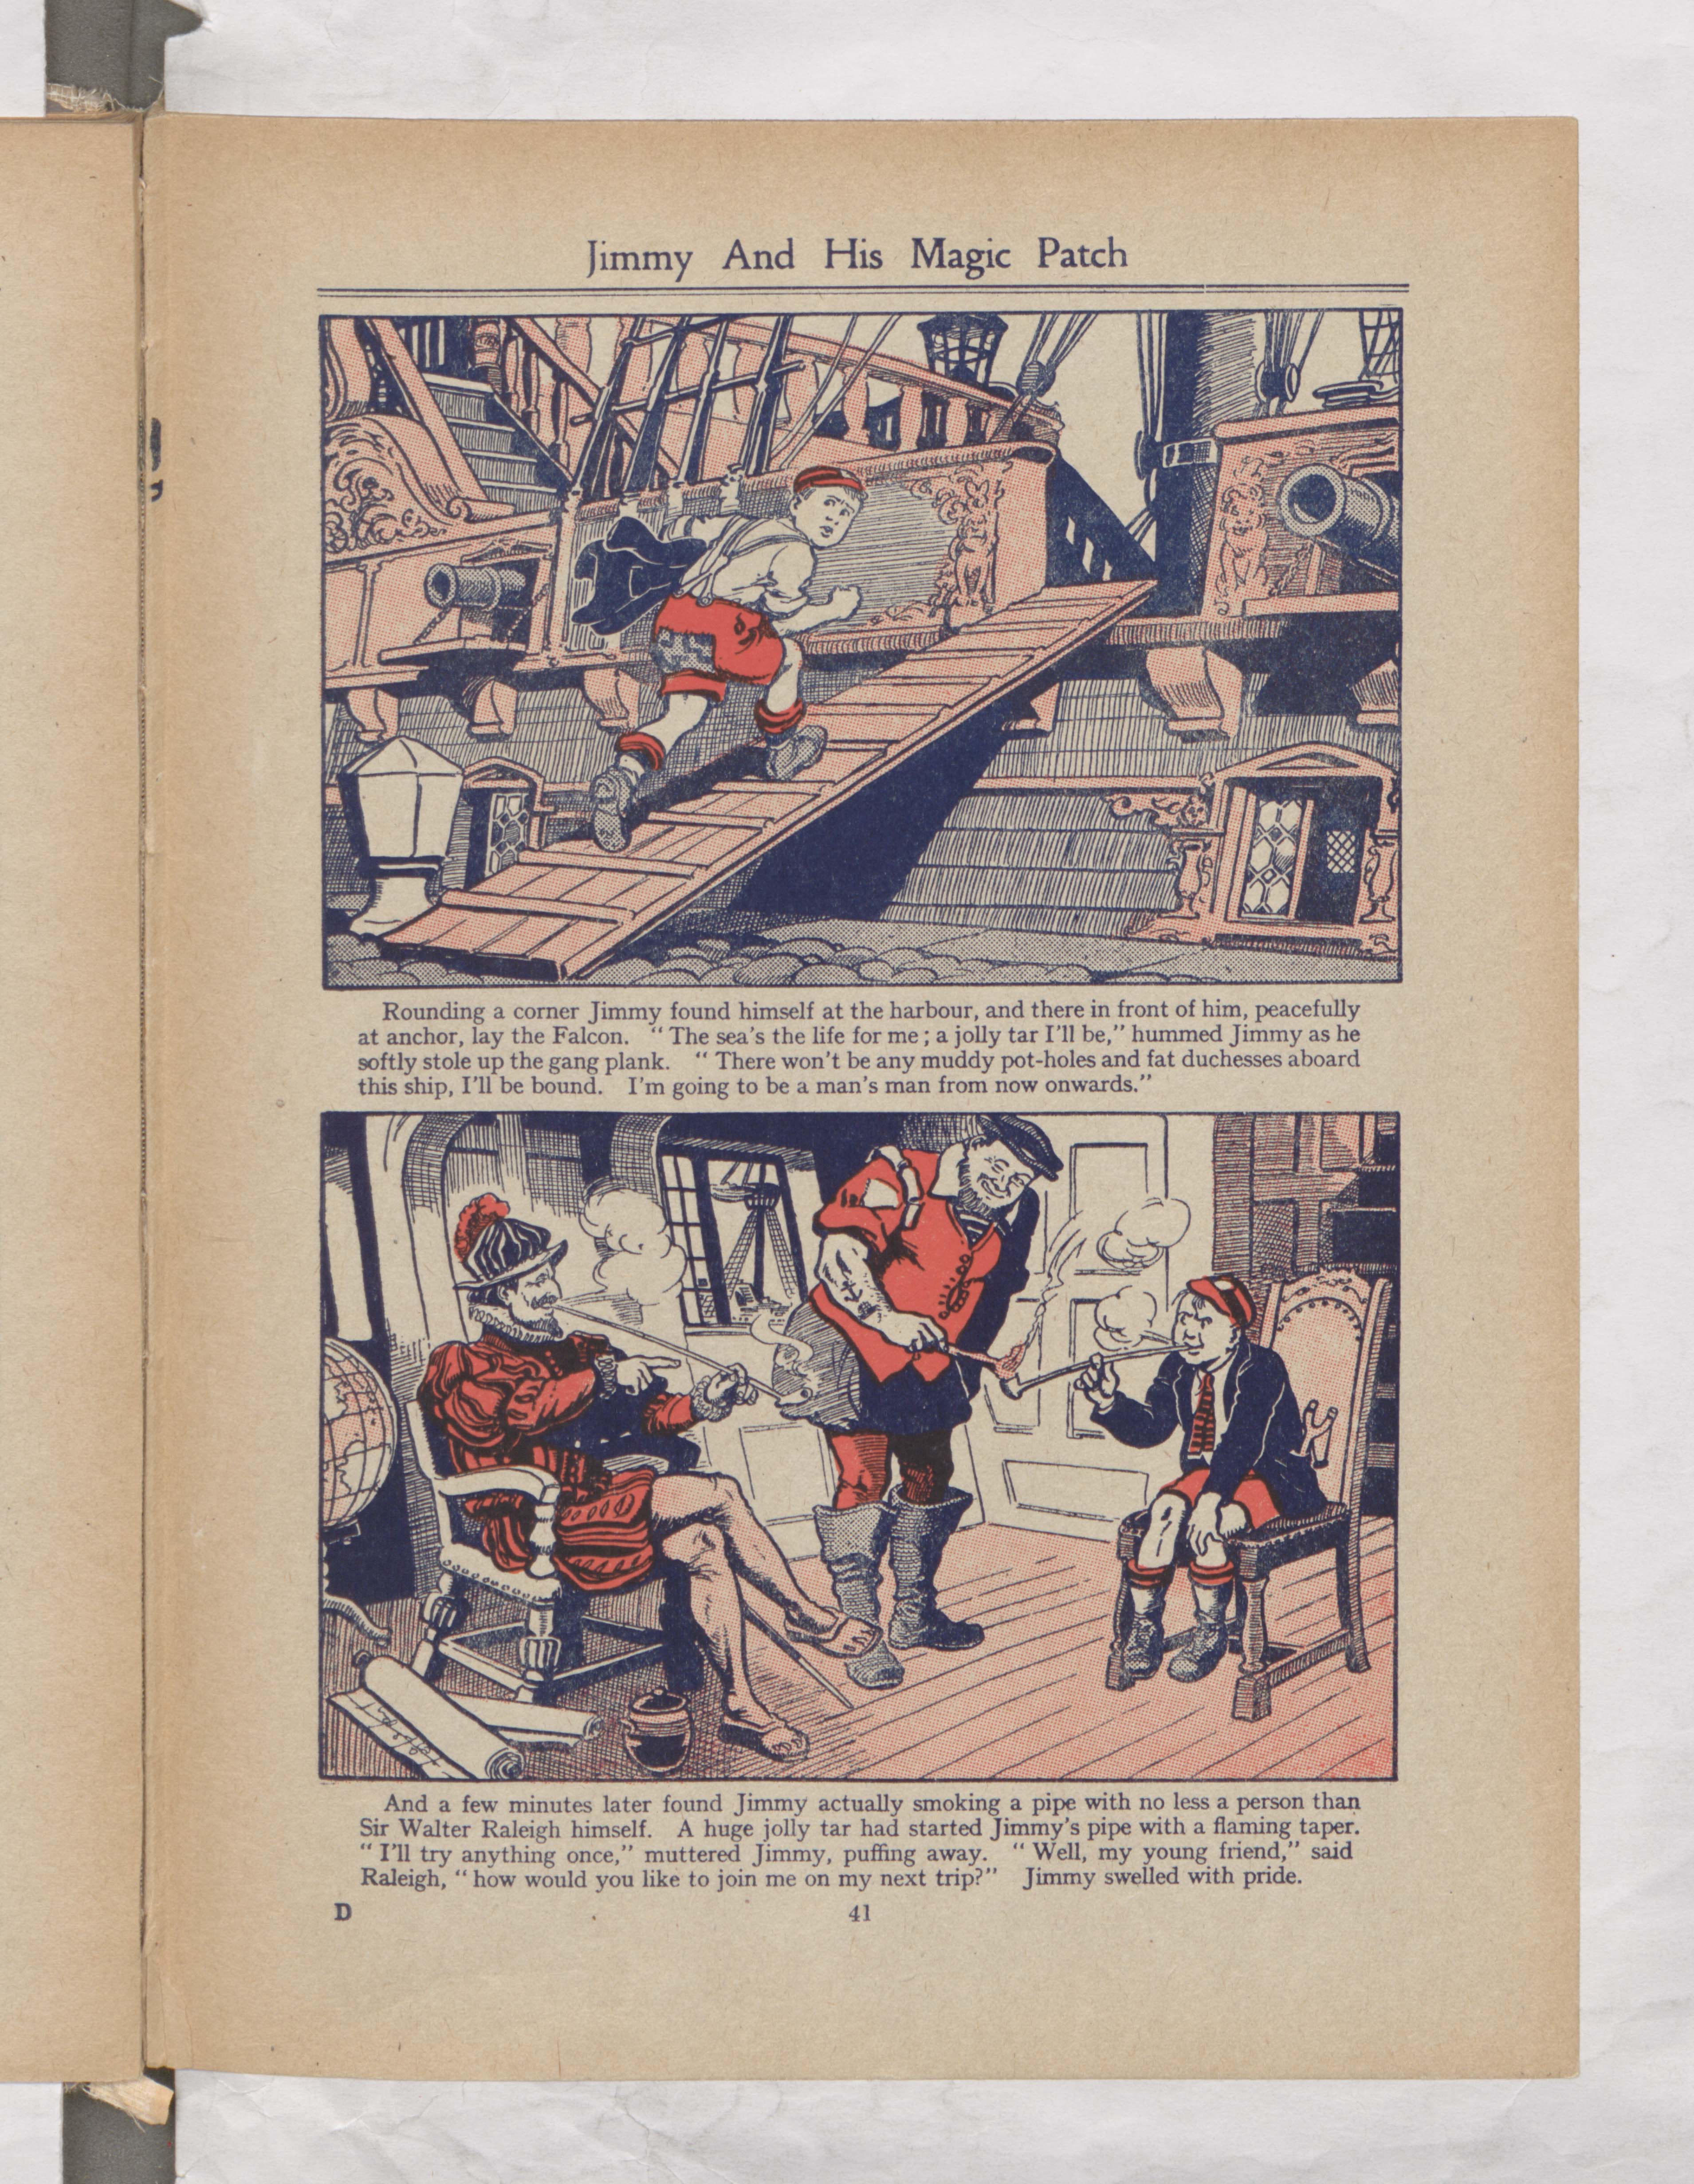 Jimmy and His Magic Patch - Page 4 - Beano Book 1944 Annual